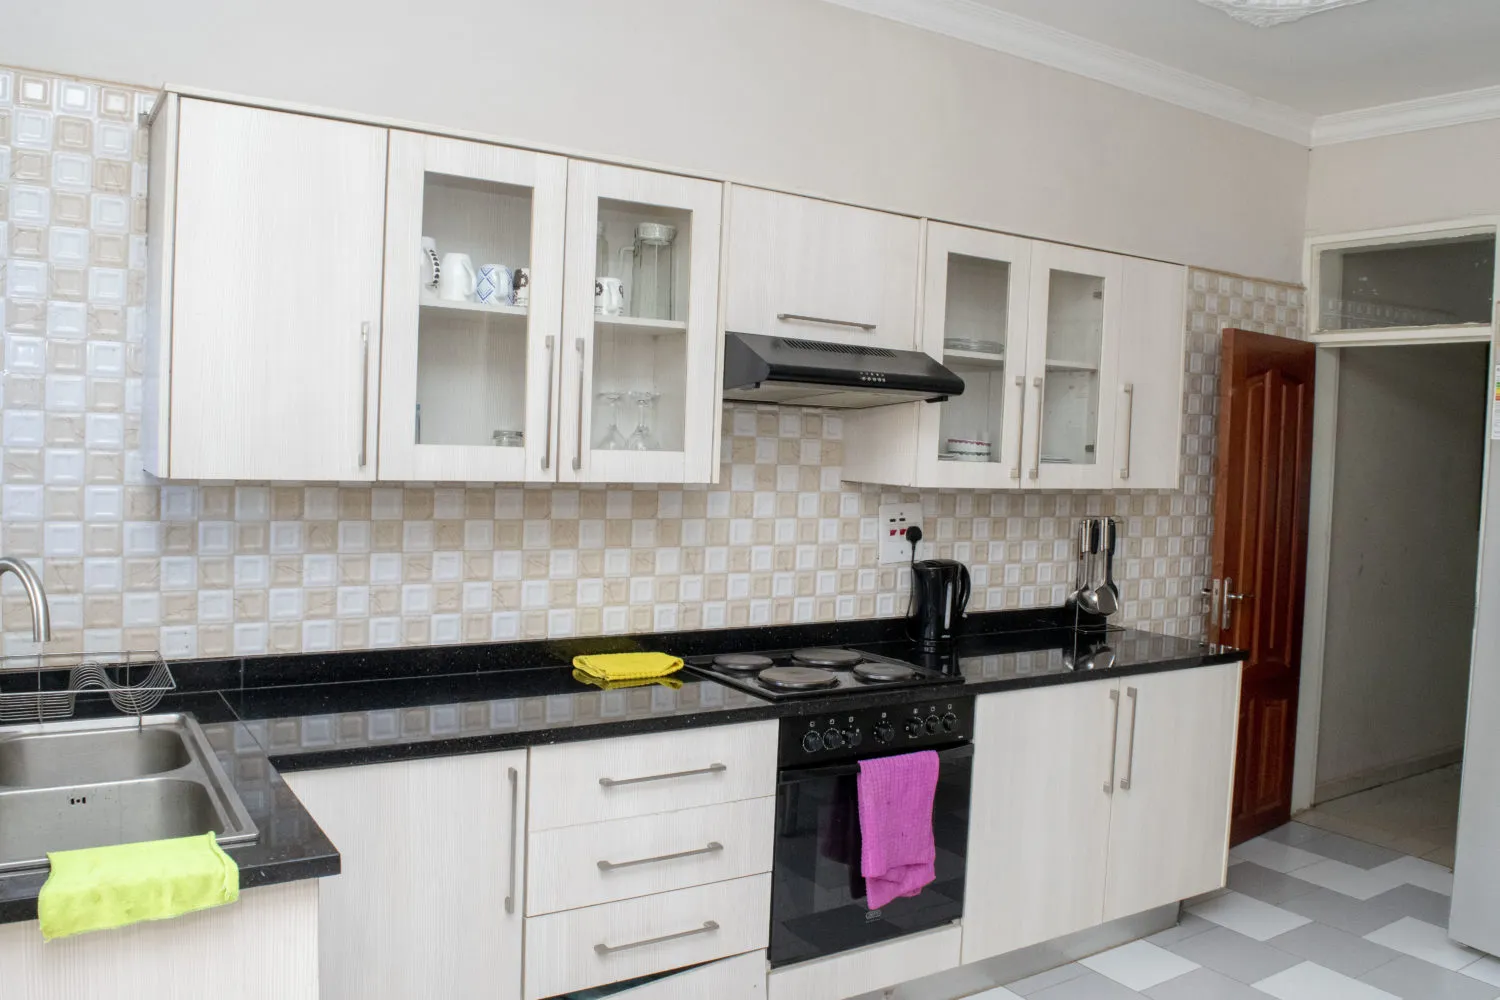 Self catering apartments in Lusaka